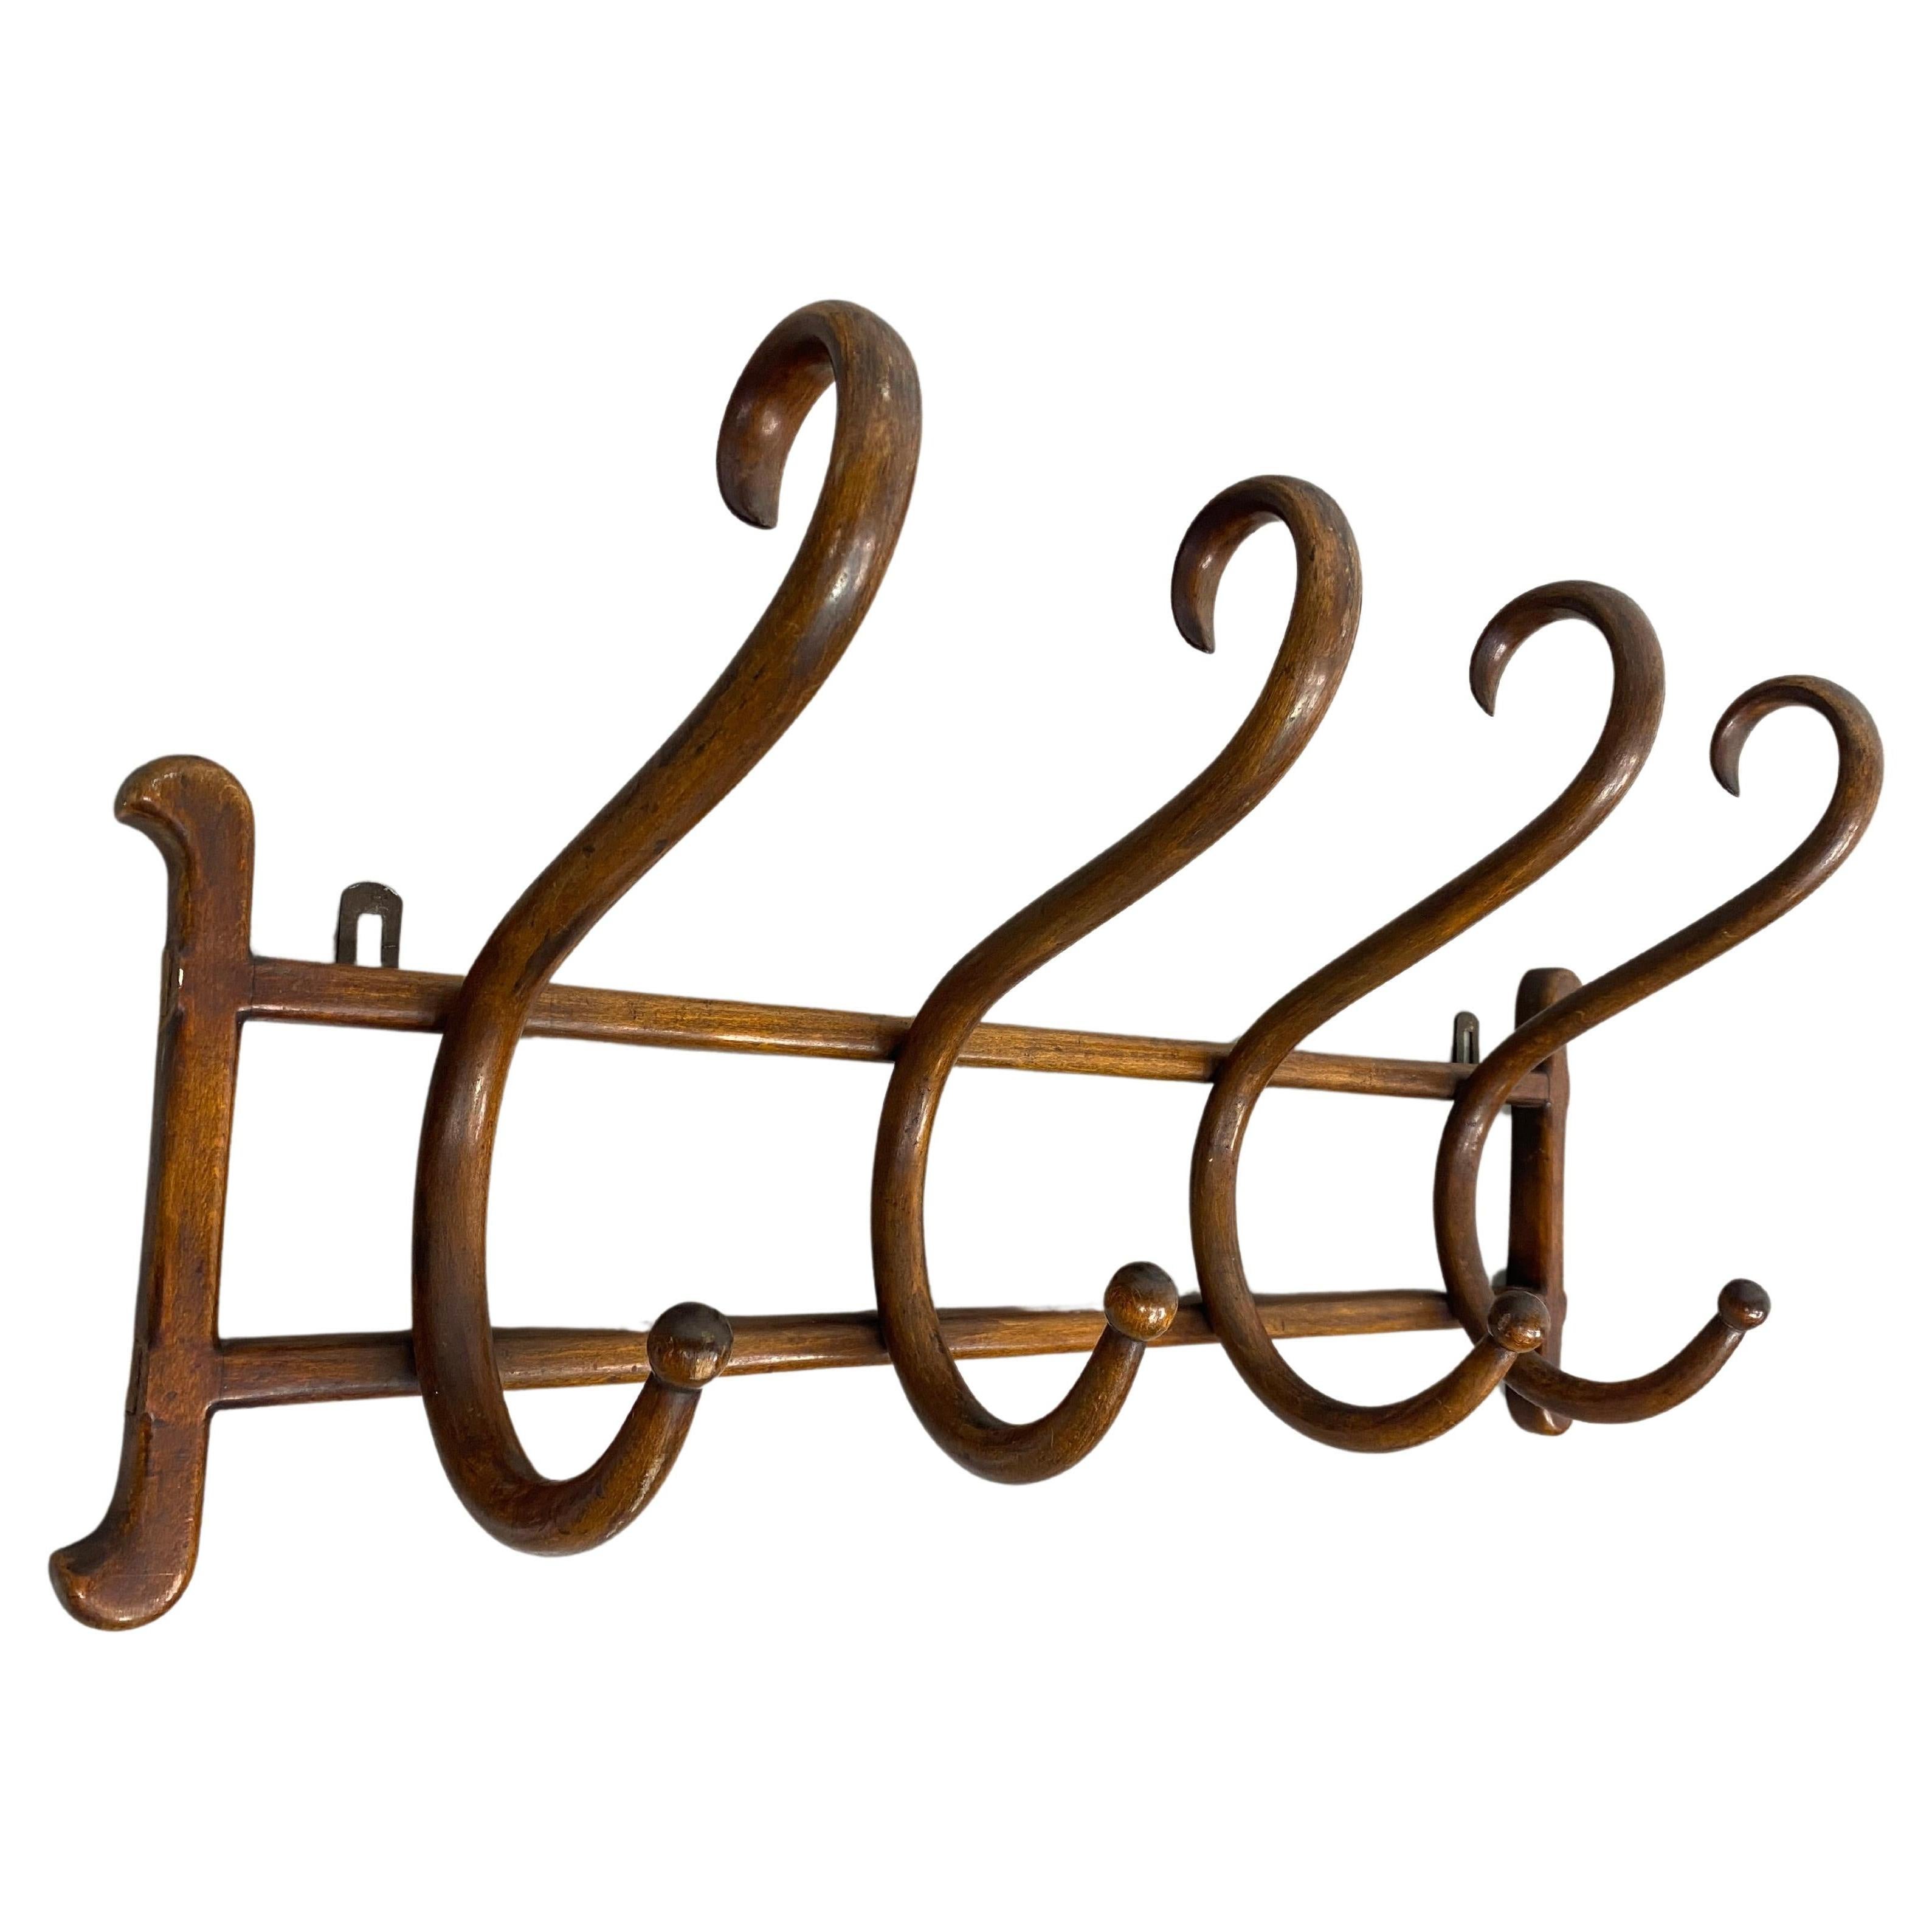 Bentwood wall coat hanger no.1 by Thonet Austria, signed on the back in very good original vintage condition.